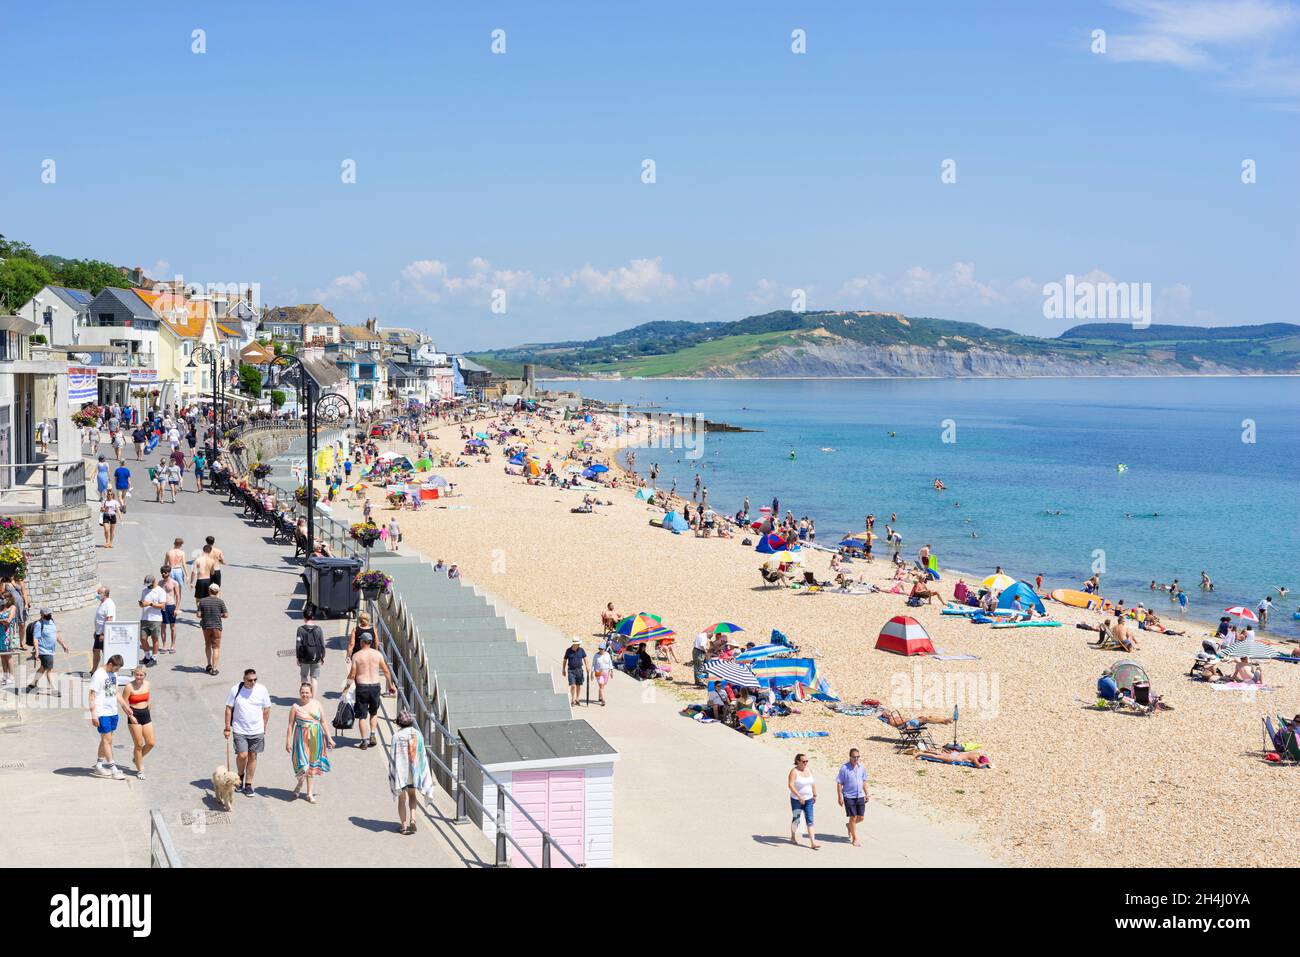 Families on the beach with pop up beach tents deckchairs beach umbrellas and paddle boards on Sandy beach at Lyme Regis Dorset England UK GB Europe Stock Photo